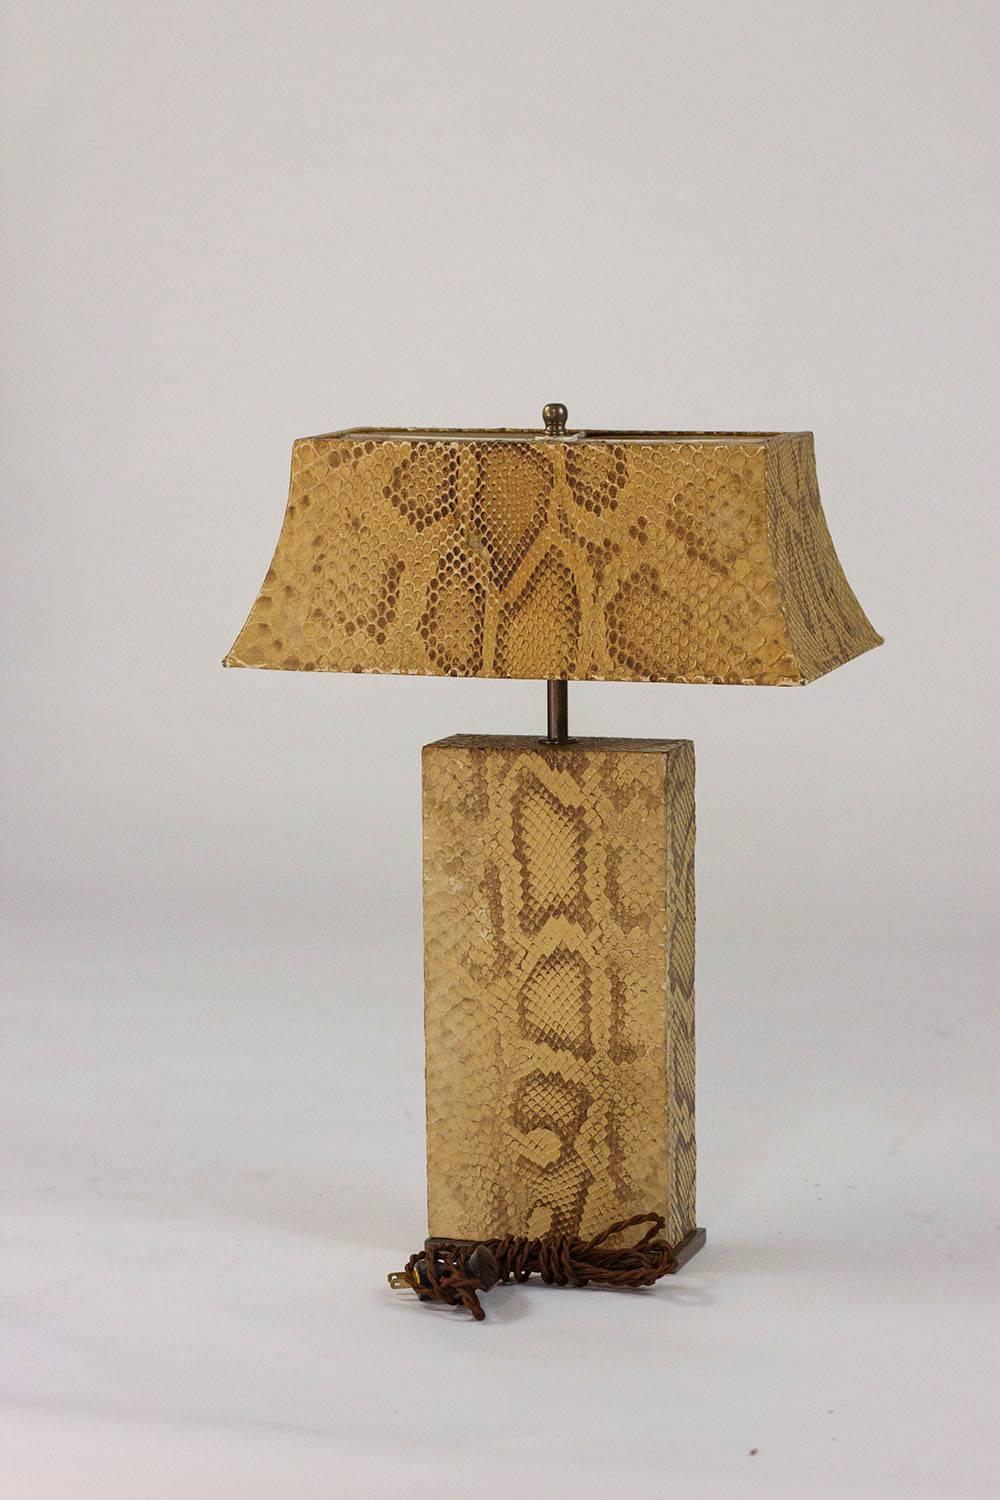 Exceptional table lamp in bronze, with base and shade both covered in python, designed by Karl Springer. Rewired for immediate use.

Karl Springer (1931-1991) was born in Germany and emigrated to America to begin a career as a bookbinder at Lord